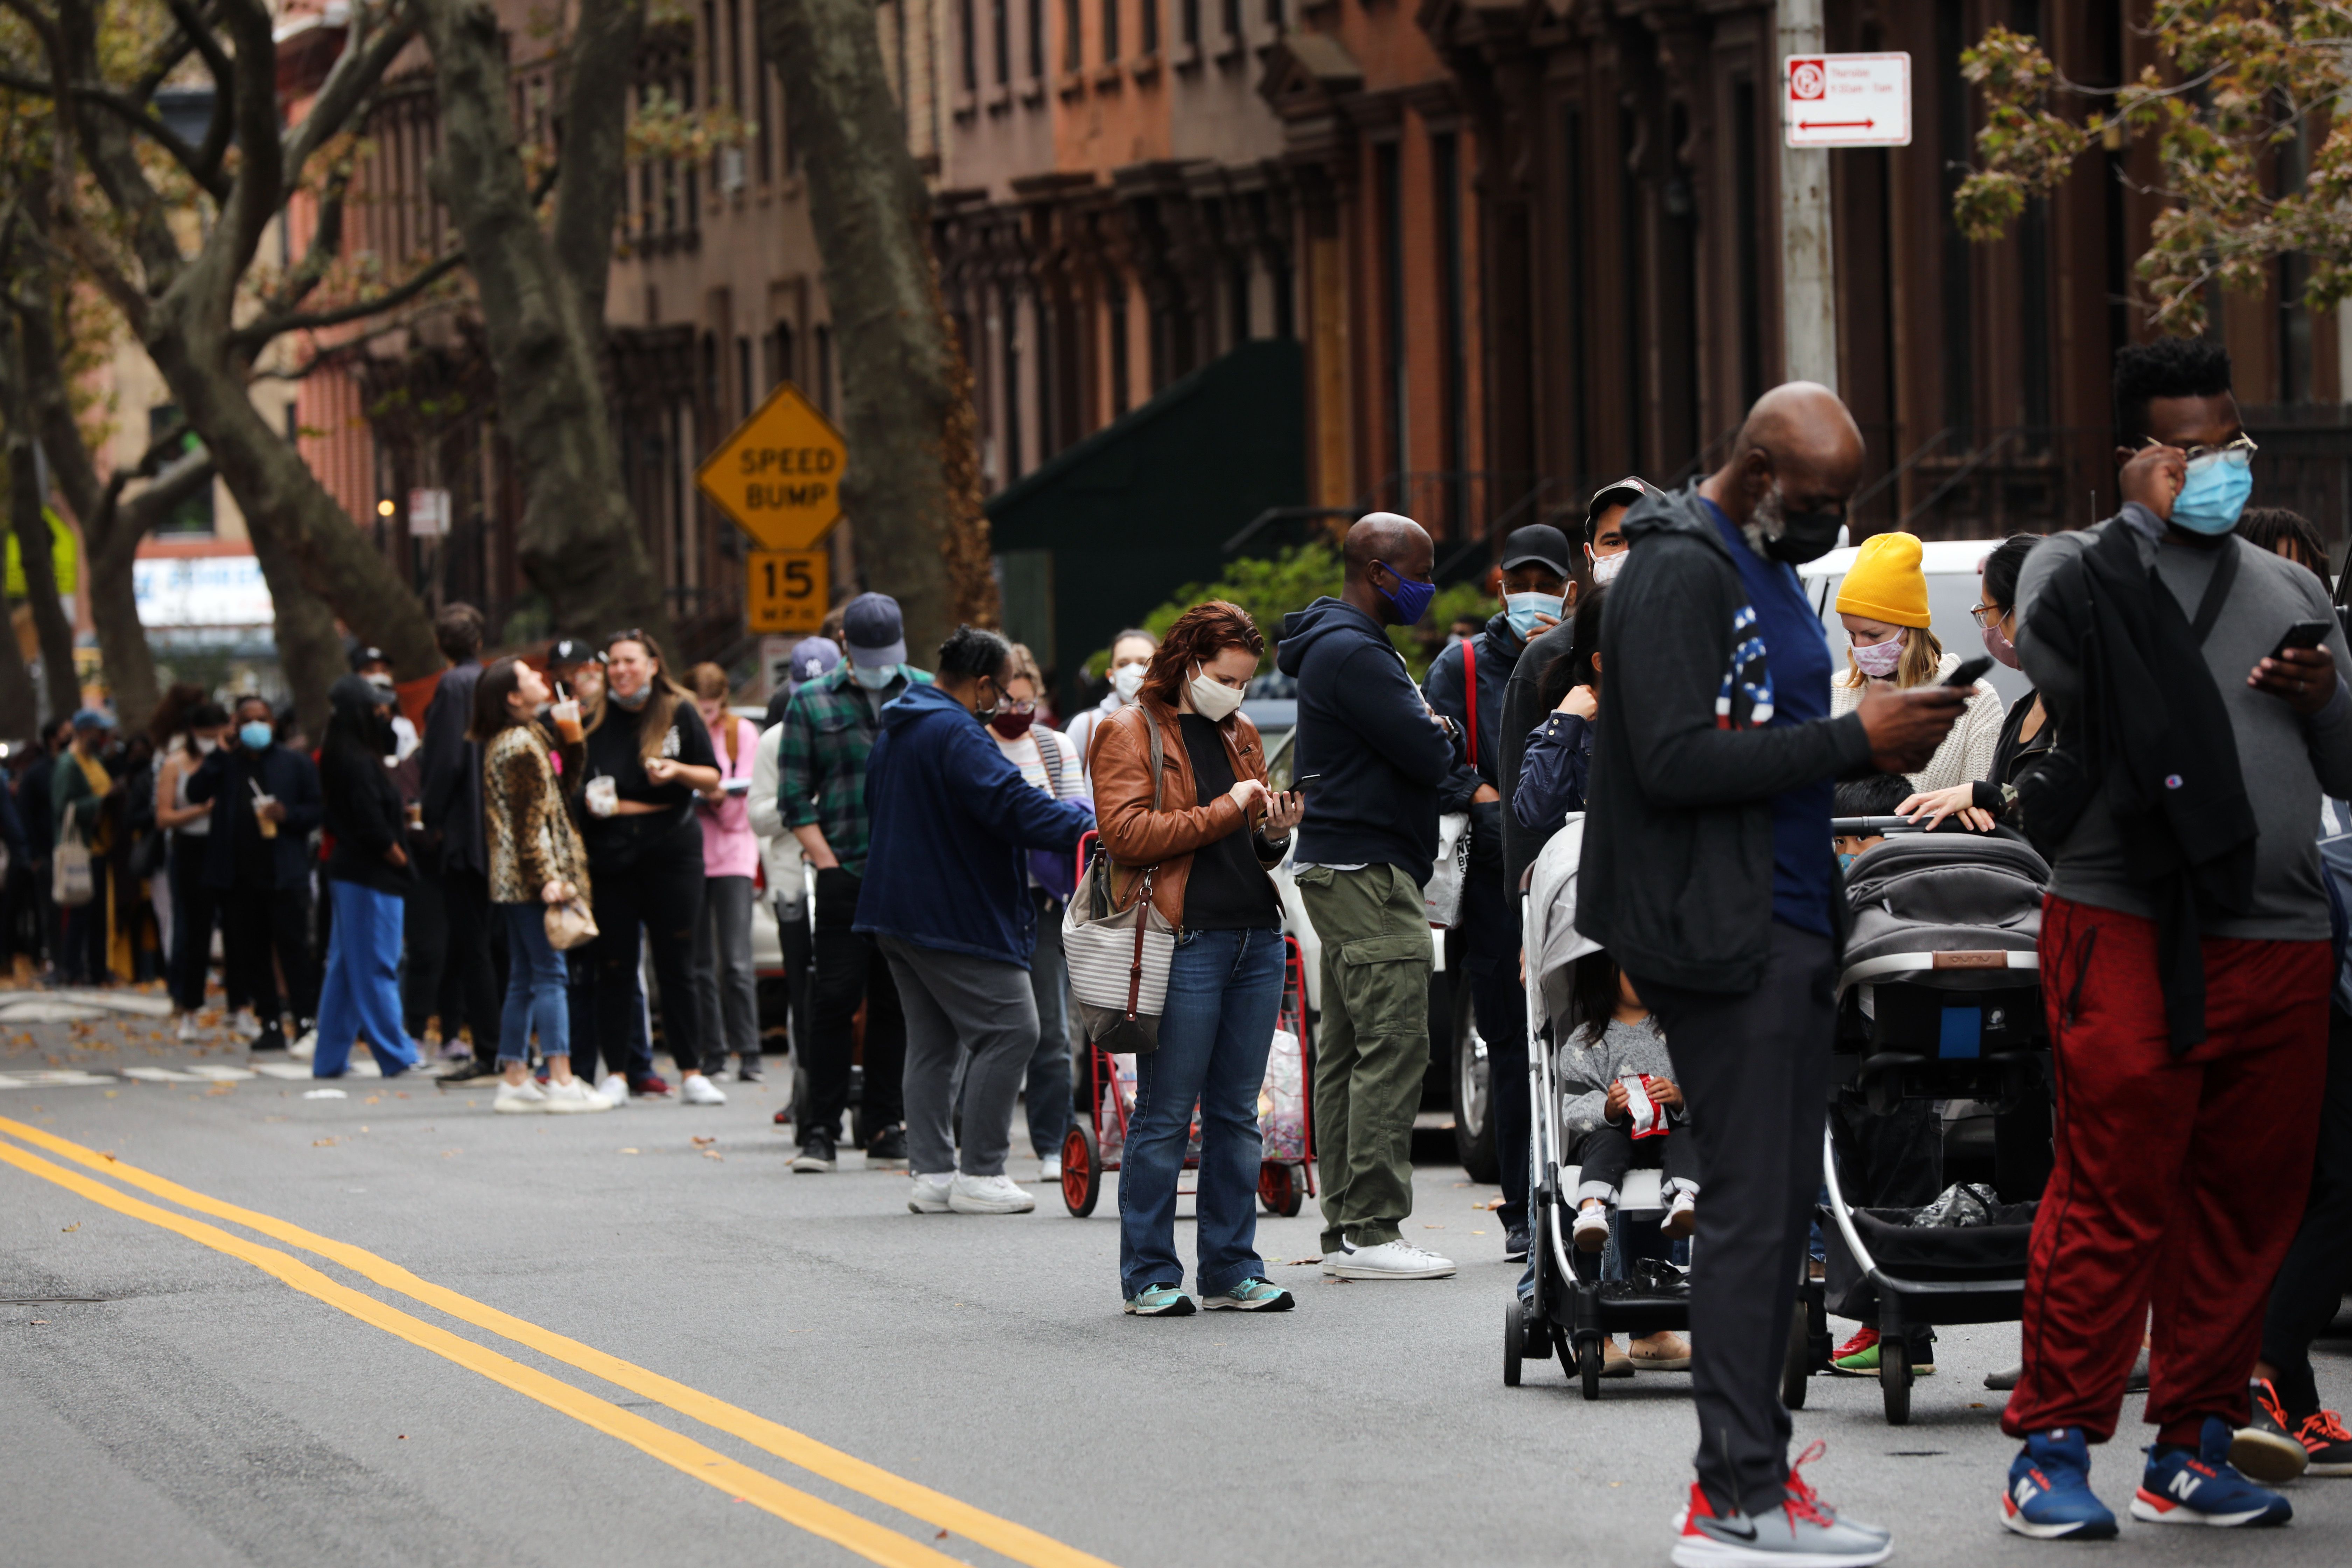 Voting lines in Brooklyn on Saturday. Photo: Spencer Platt/Getty Images